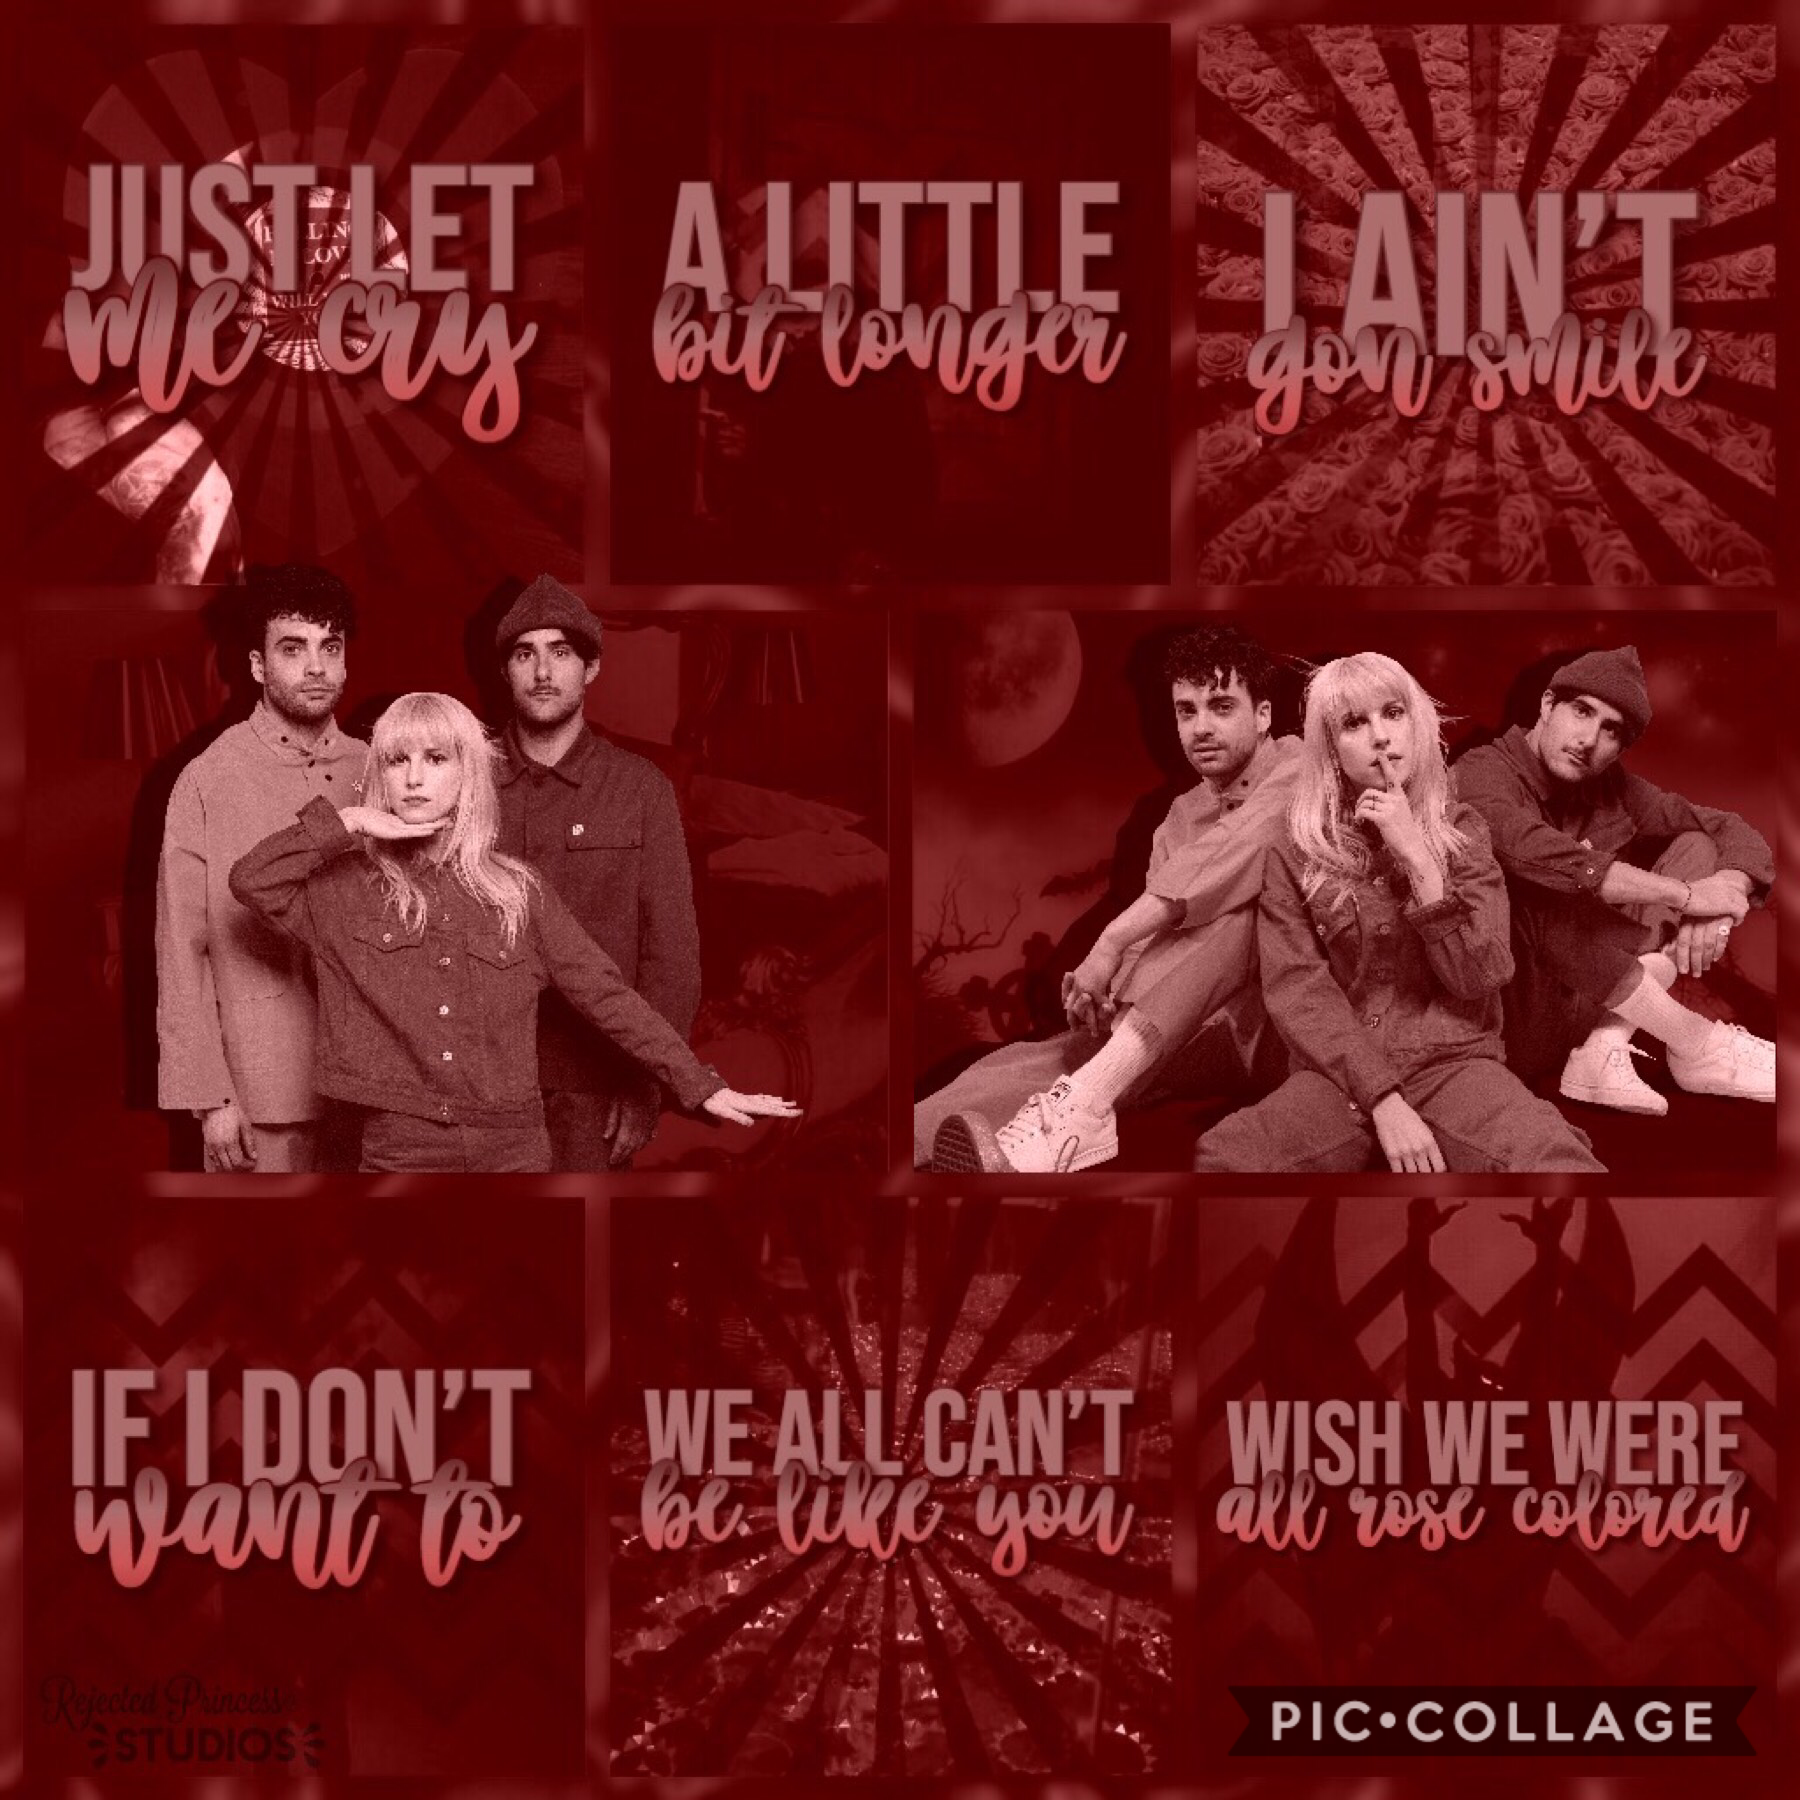 obsessivetbh’s style 🥀 Rose-Colored Boy by Paramore

I’m really hating the giant PicCollage logo that has been added to my edit when I post it even though I didn’t use PicCollage to make it.